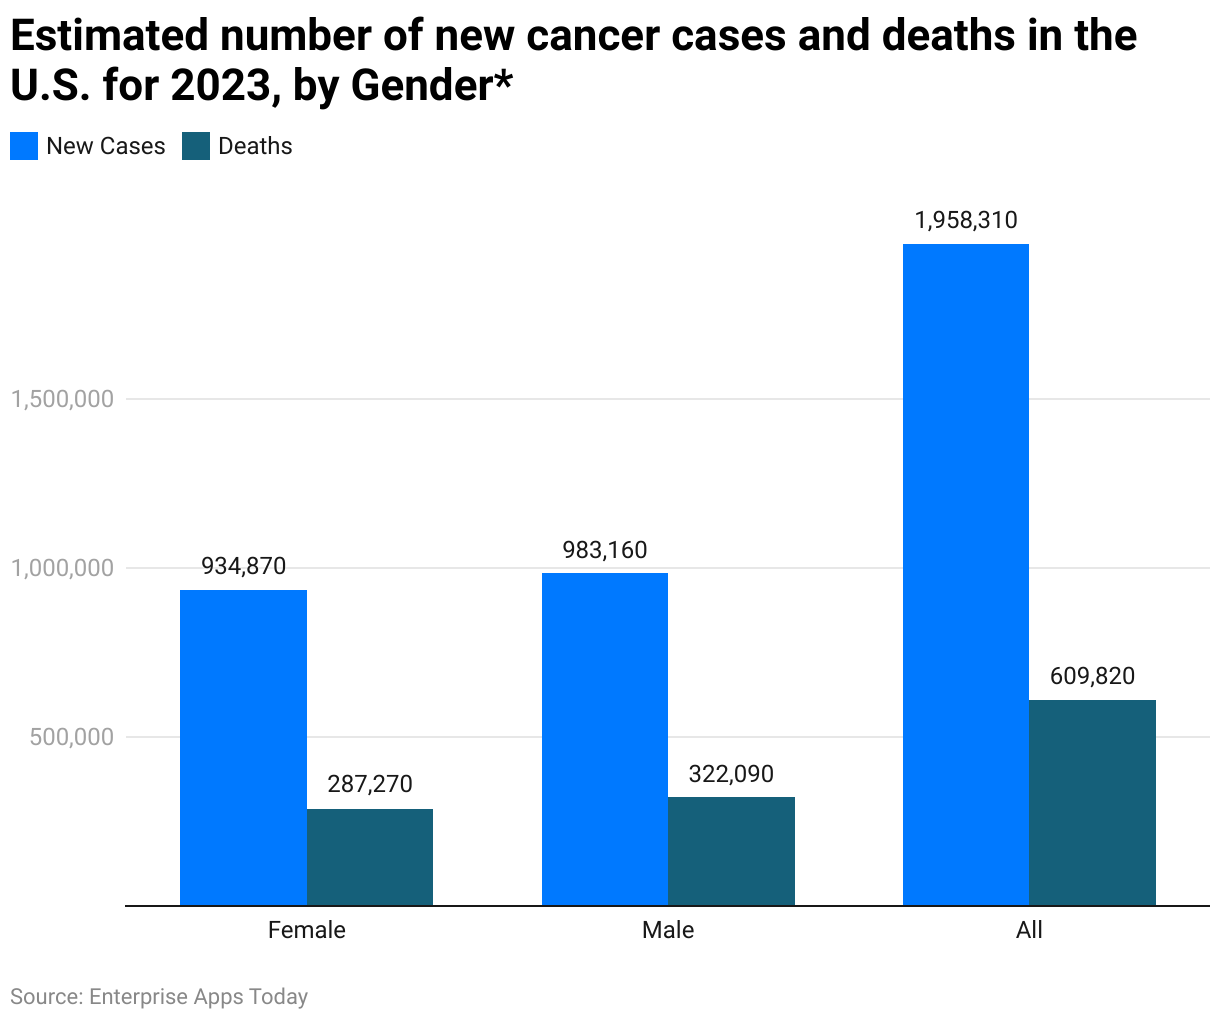 Estimated number of new cancer cases and deaths in the U.S. for 2023, by Gender* 